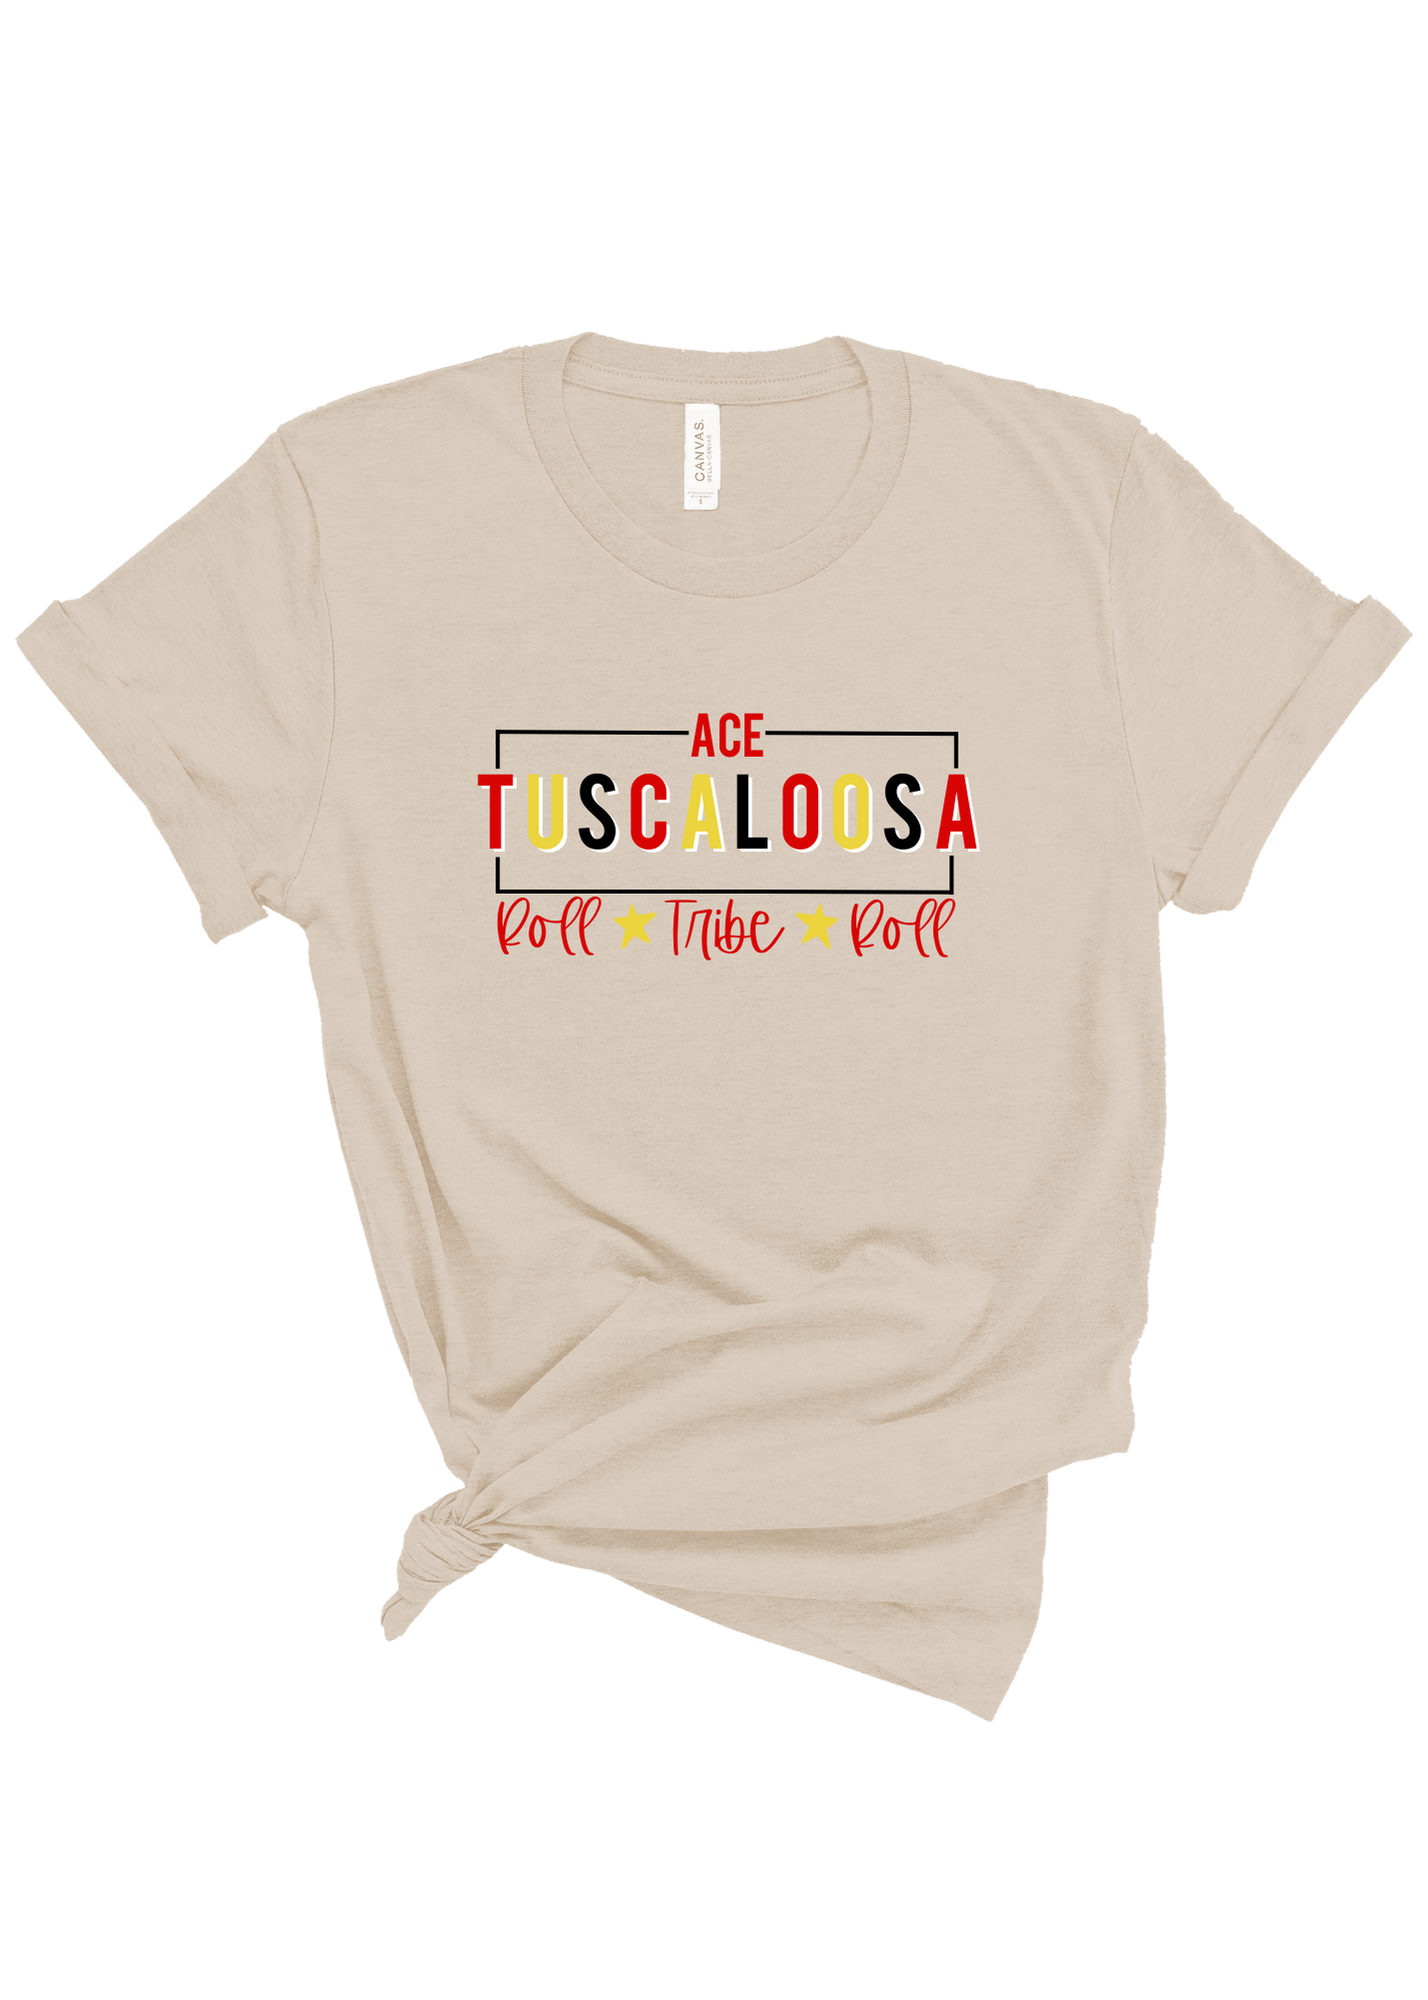 ACE Tuscaloosa | Adult Tee-Sister Shirts-Sister Shirts, Cute & Custom Tees for Mama & Littles in Trussville, Alabama.